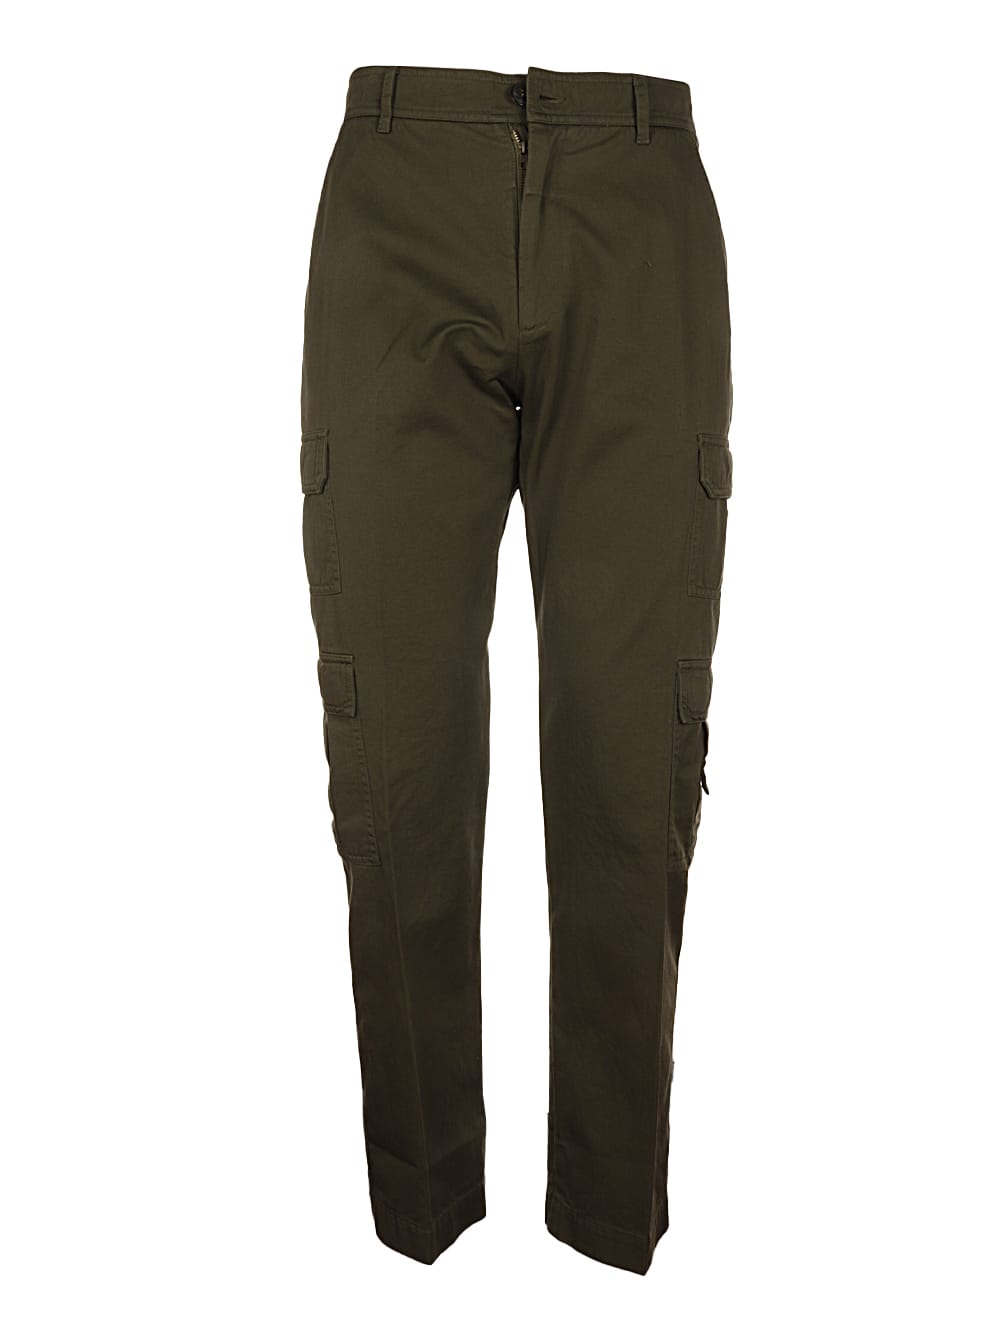 Martine Rose Grow Trousers